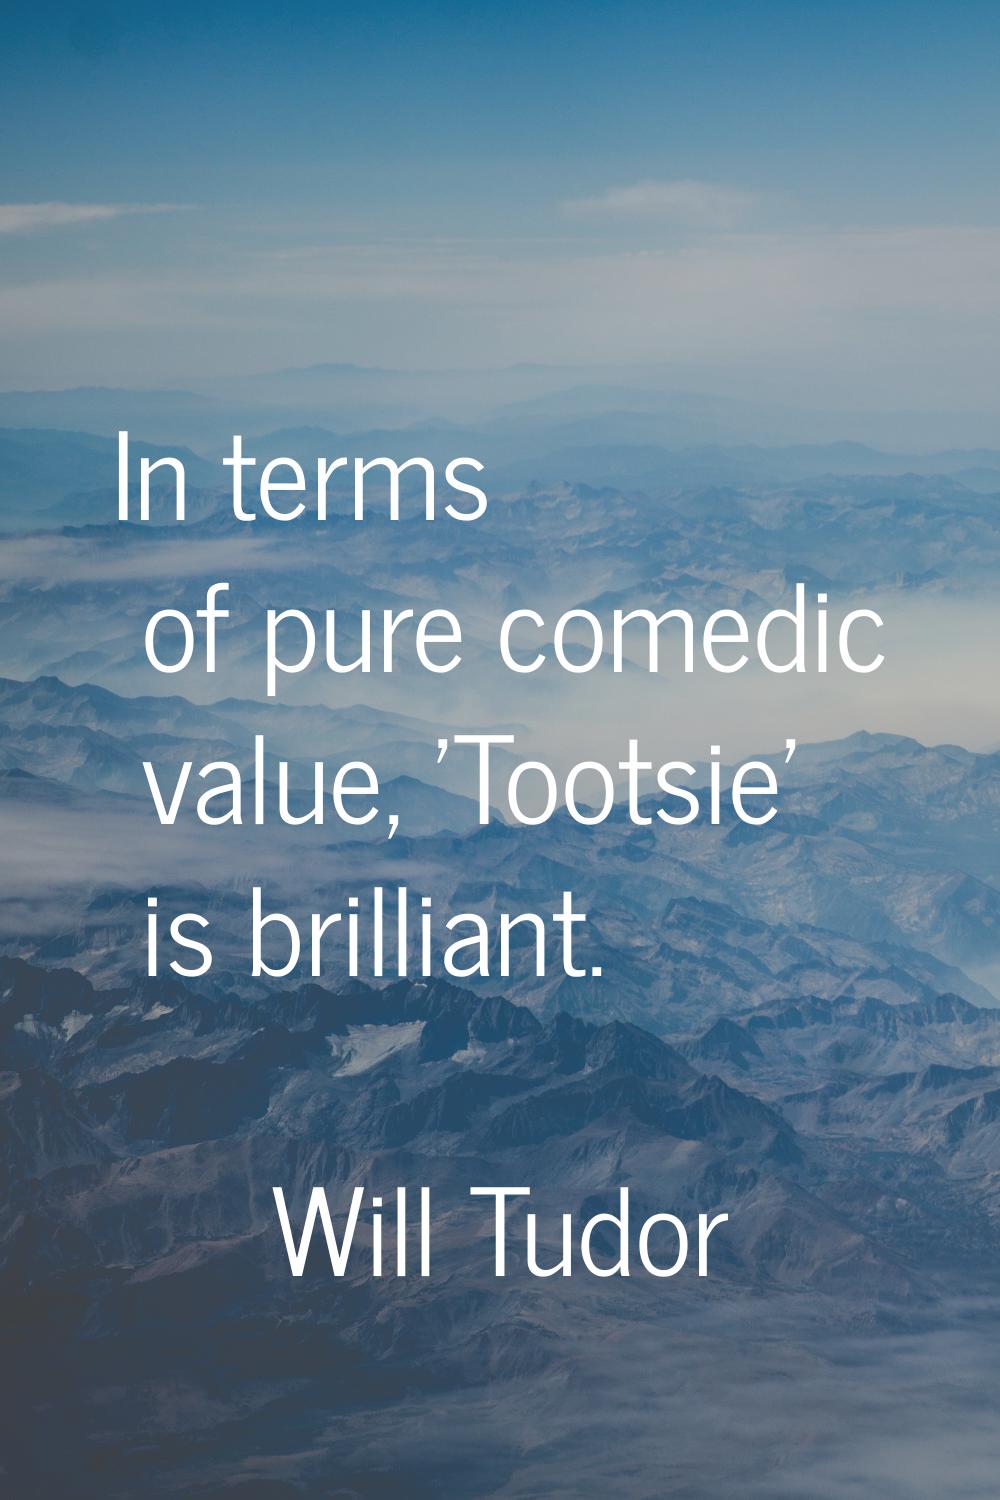 In terms of pure comedic value, 'Tootsie' is brilliant.